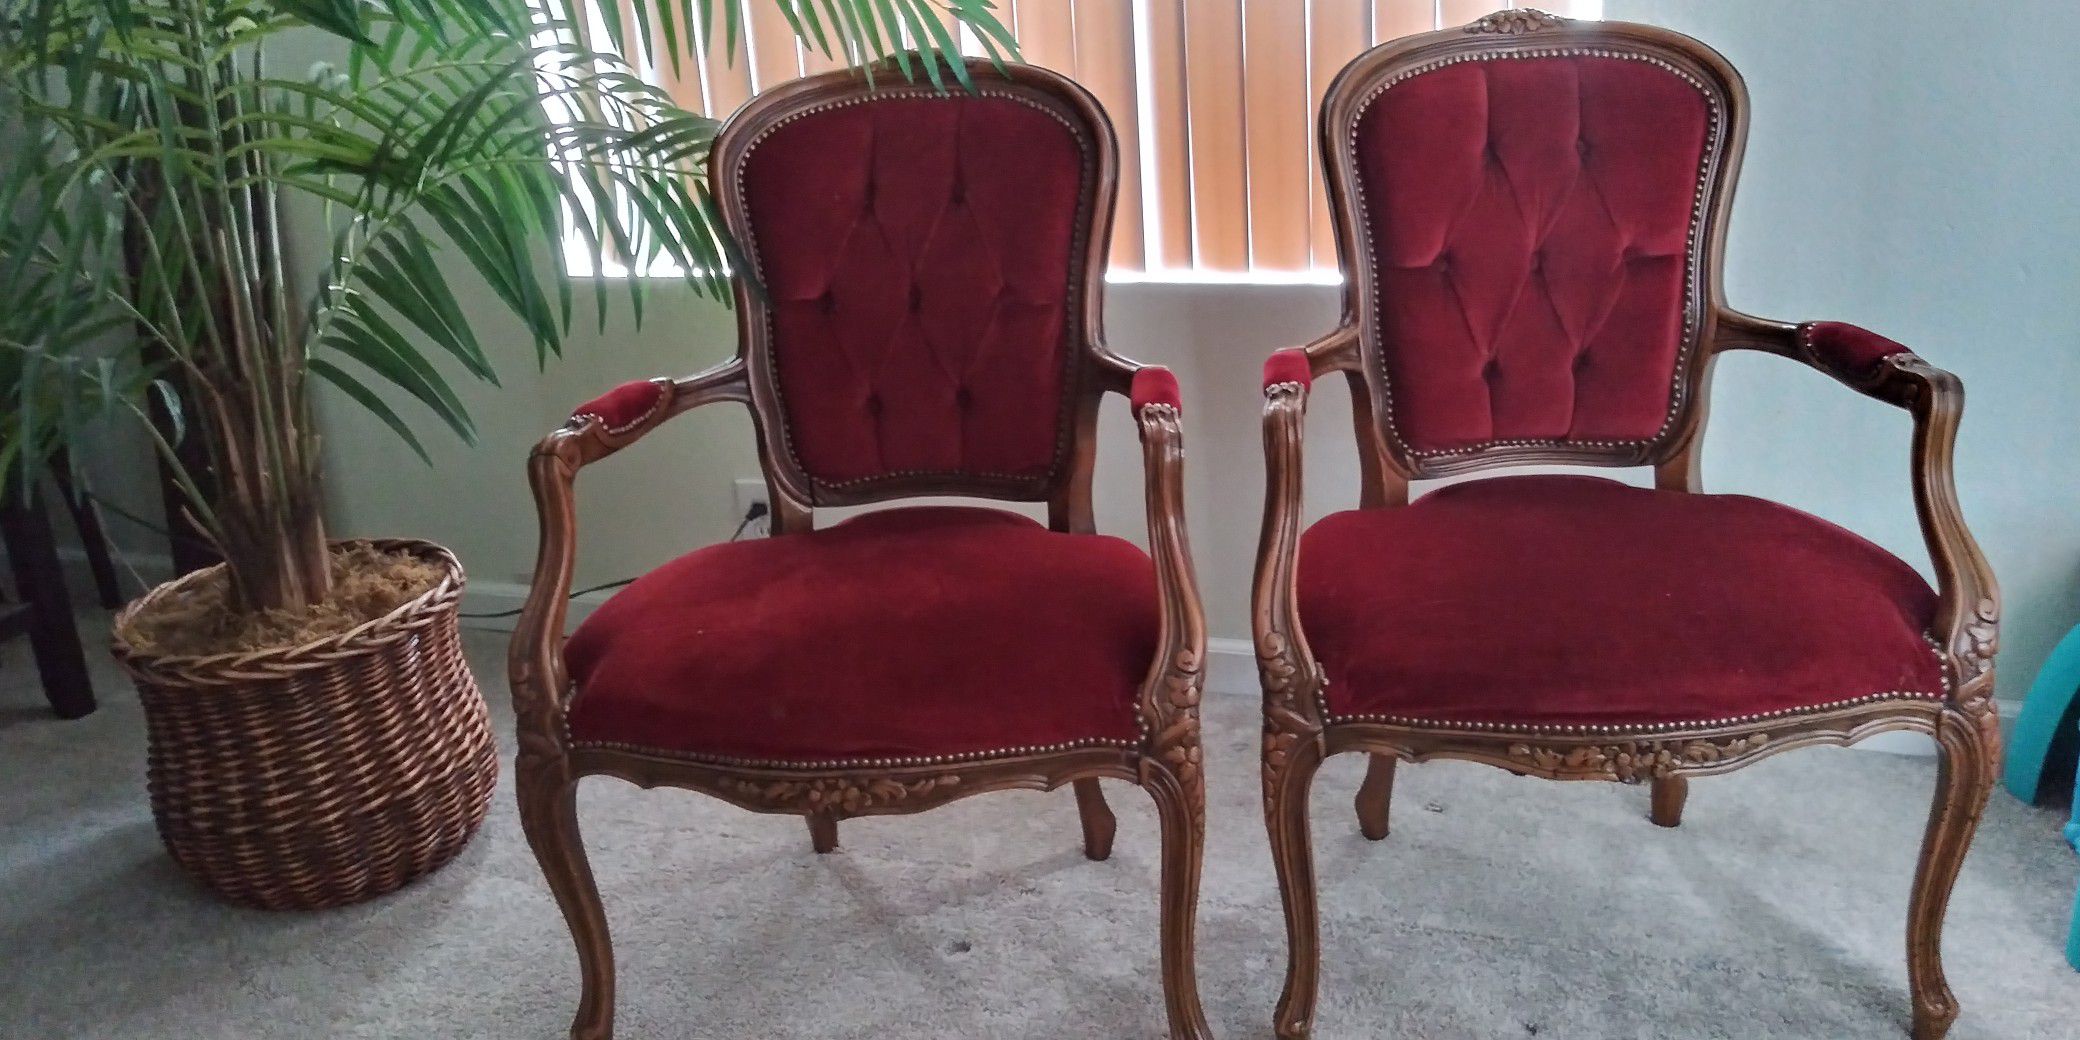 Antique set of chairs